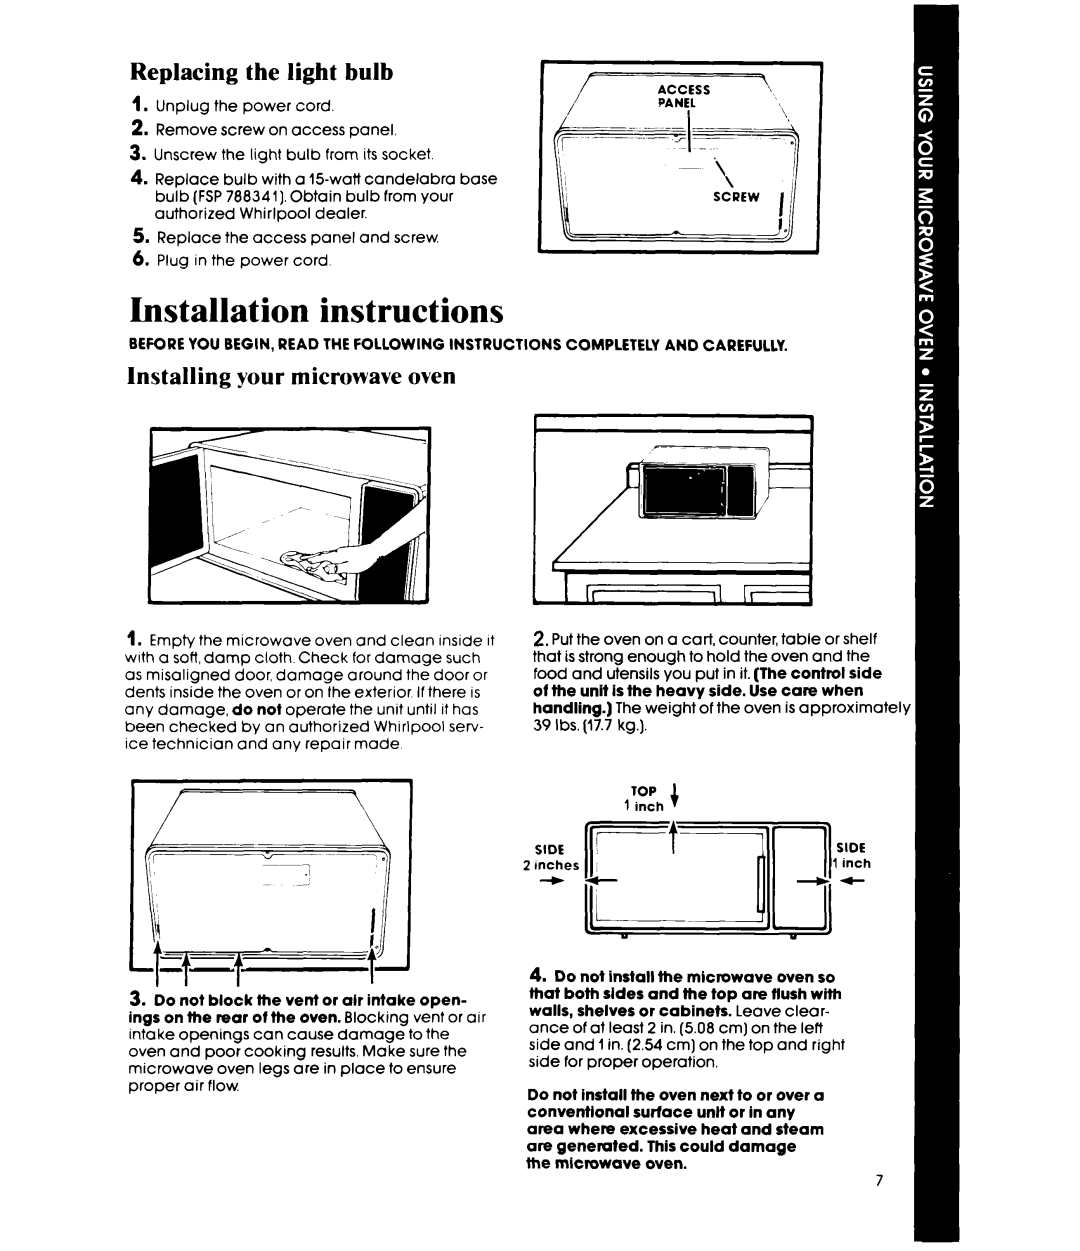 Whirlpool MW3200XP manual Installation instructions, Light bulb, Installing your microwave oven 